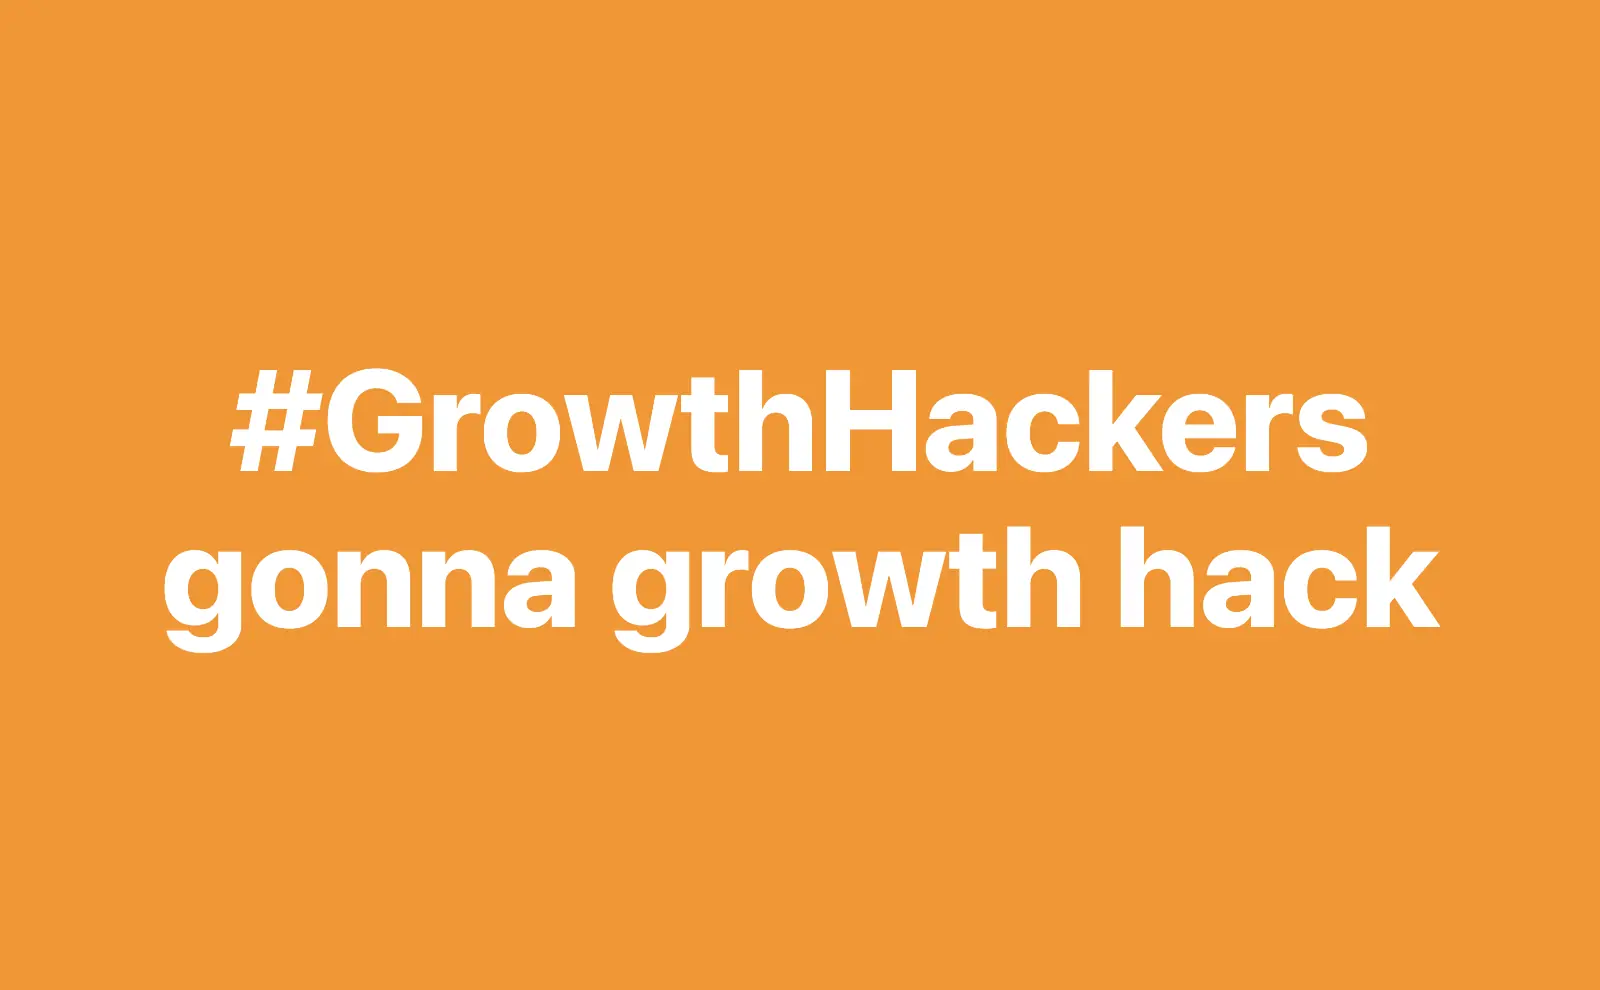 Hashtag Growth Hackers gonna growth hack